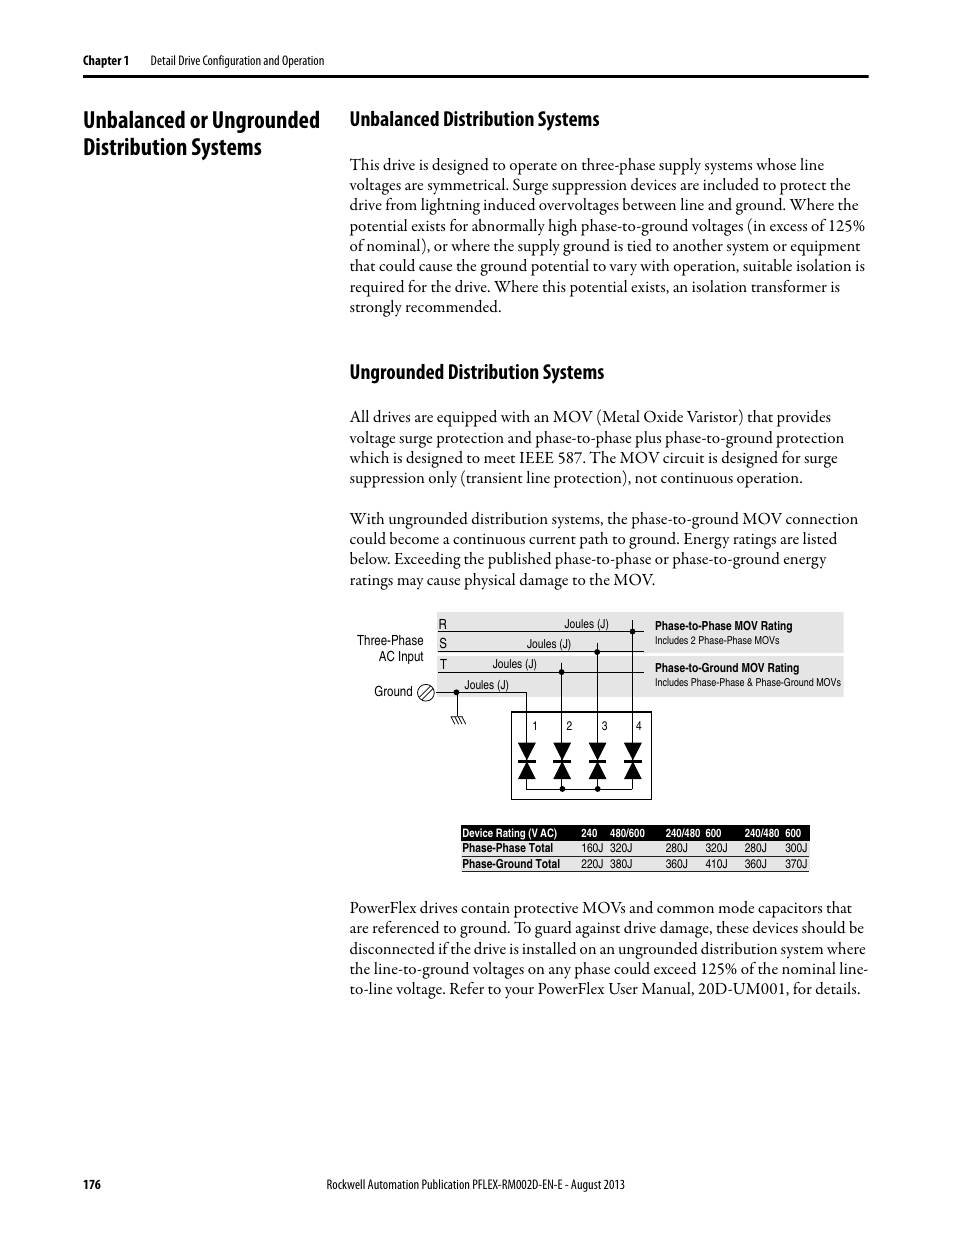 Unbalanced or ungrounded distribution systems, Unbalanced distribution systems, Ungrounded distribution systems | Rockwell Automation 20D PowerFlex 700S with Phase I Control Reference Manual User Manual | Page 176 / 190